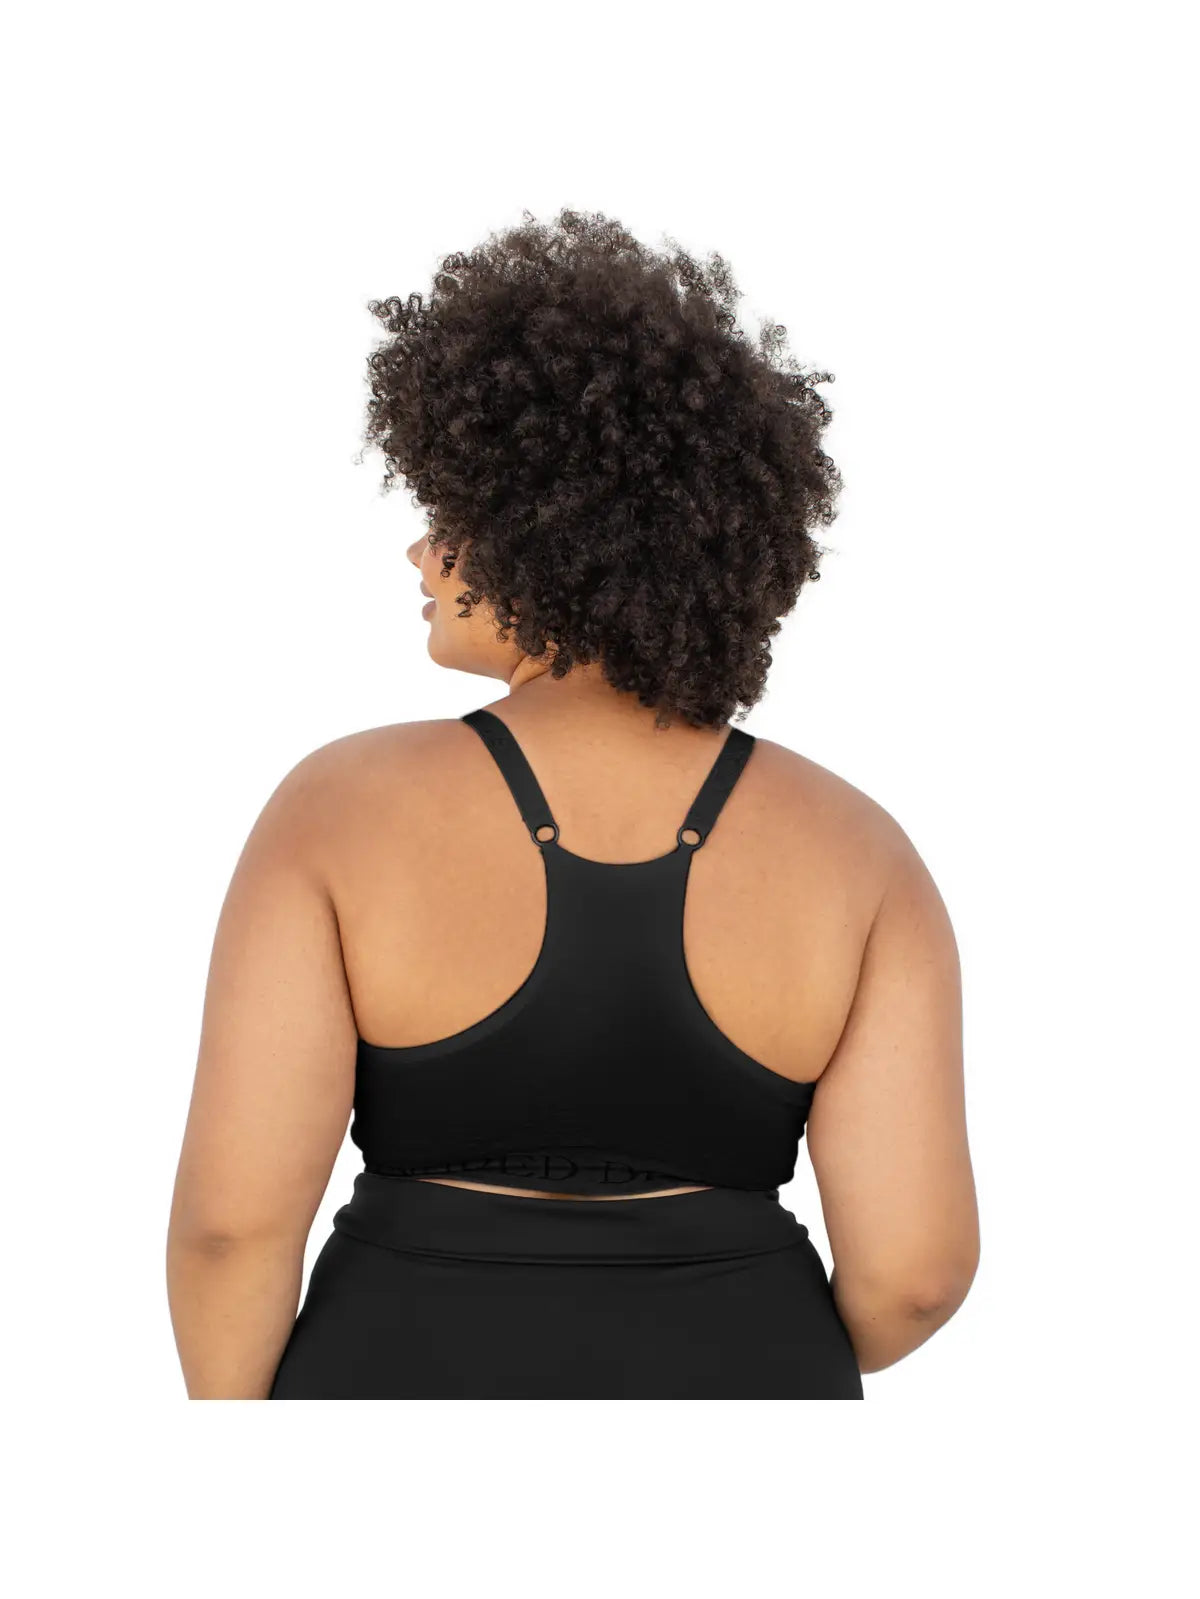 Kindred Bravely Sublime Hands-Free Sports Pumping Bra | All-in-One Nursing  Sports Bra